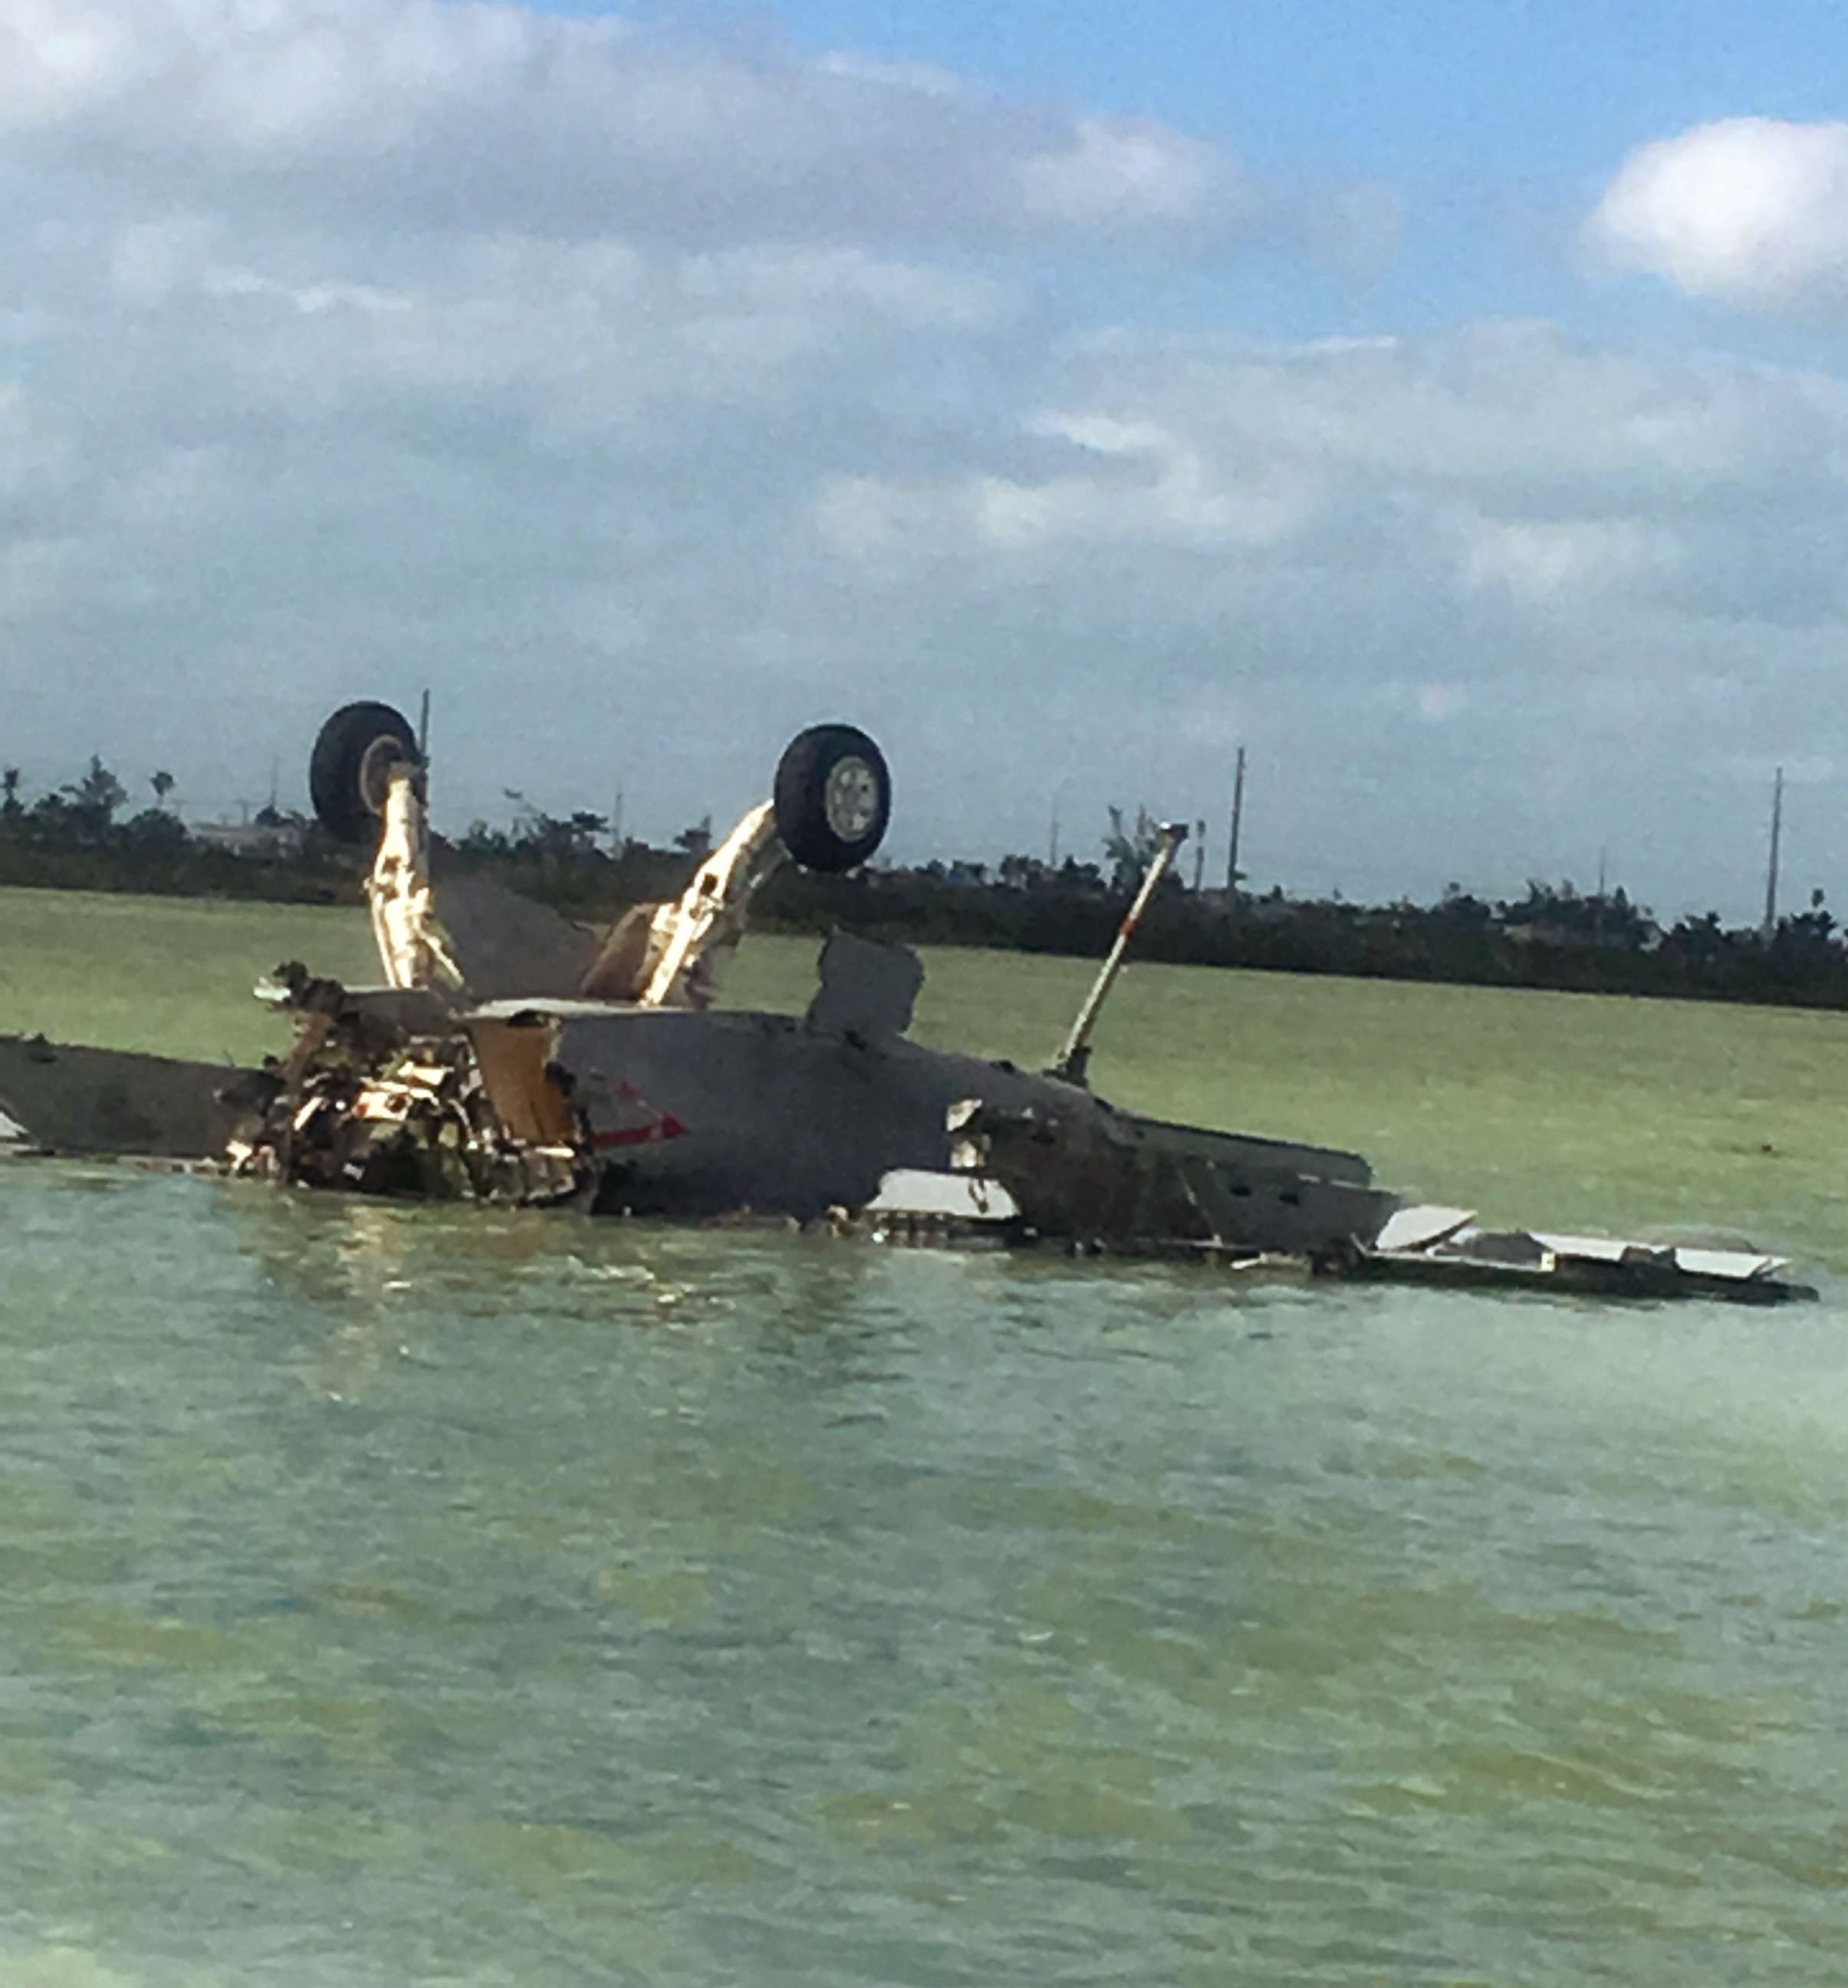 PHOTO: An image made from eyewitness video shows the remains of a Navy F/A-18 Super Hornet that crashed near Boca Chica Field, Naval Air Station, Key West, Fla., on March 14, 2018.